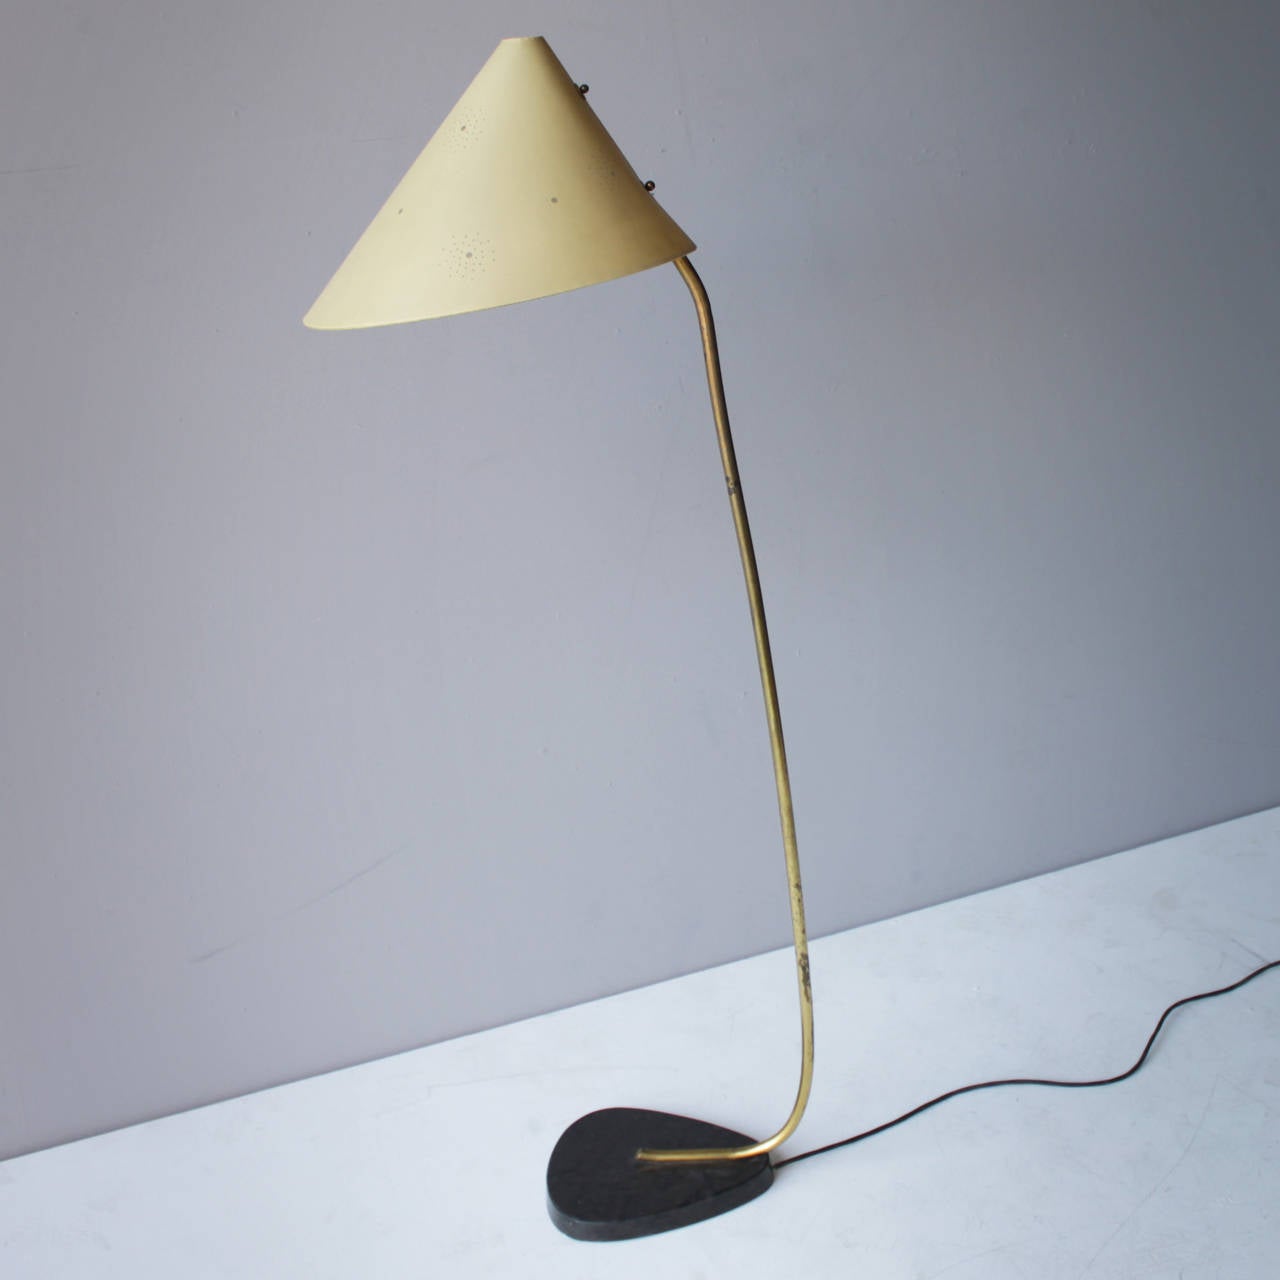 The origins of this floor lamp are unknown, but it shows strong similarities with some models of the Austrian company J.T. Kalmar. Though the marble base would rather suggest an Italian provenance. 
This very elegant lamp could be used as a reading